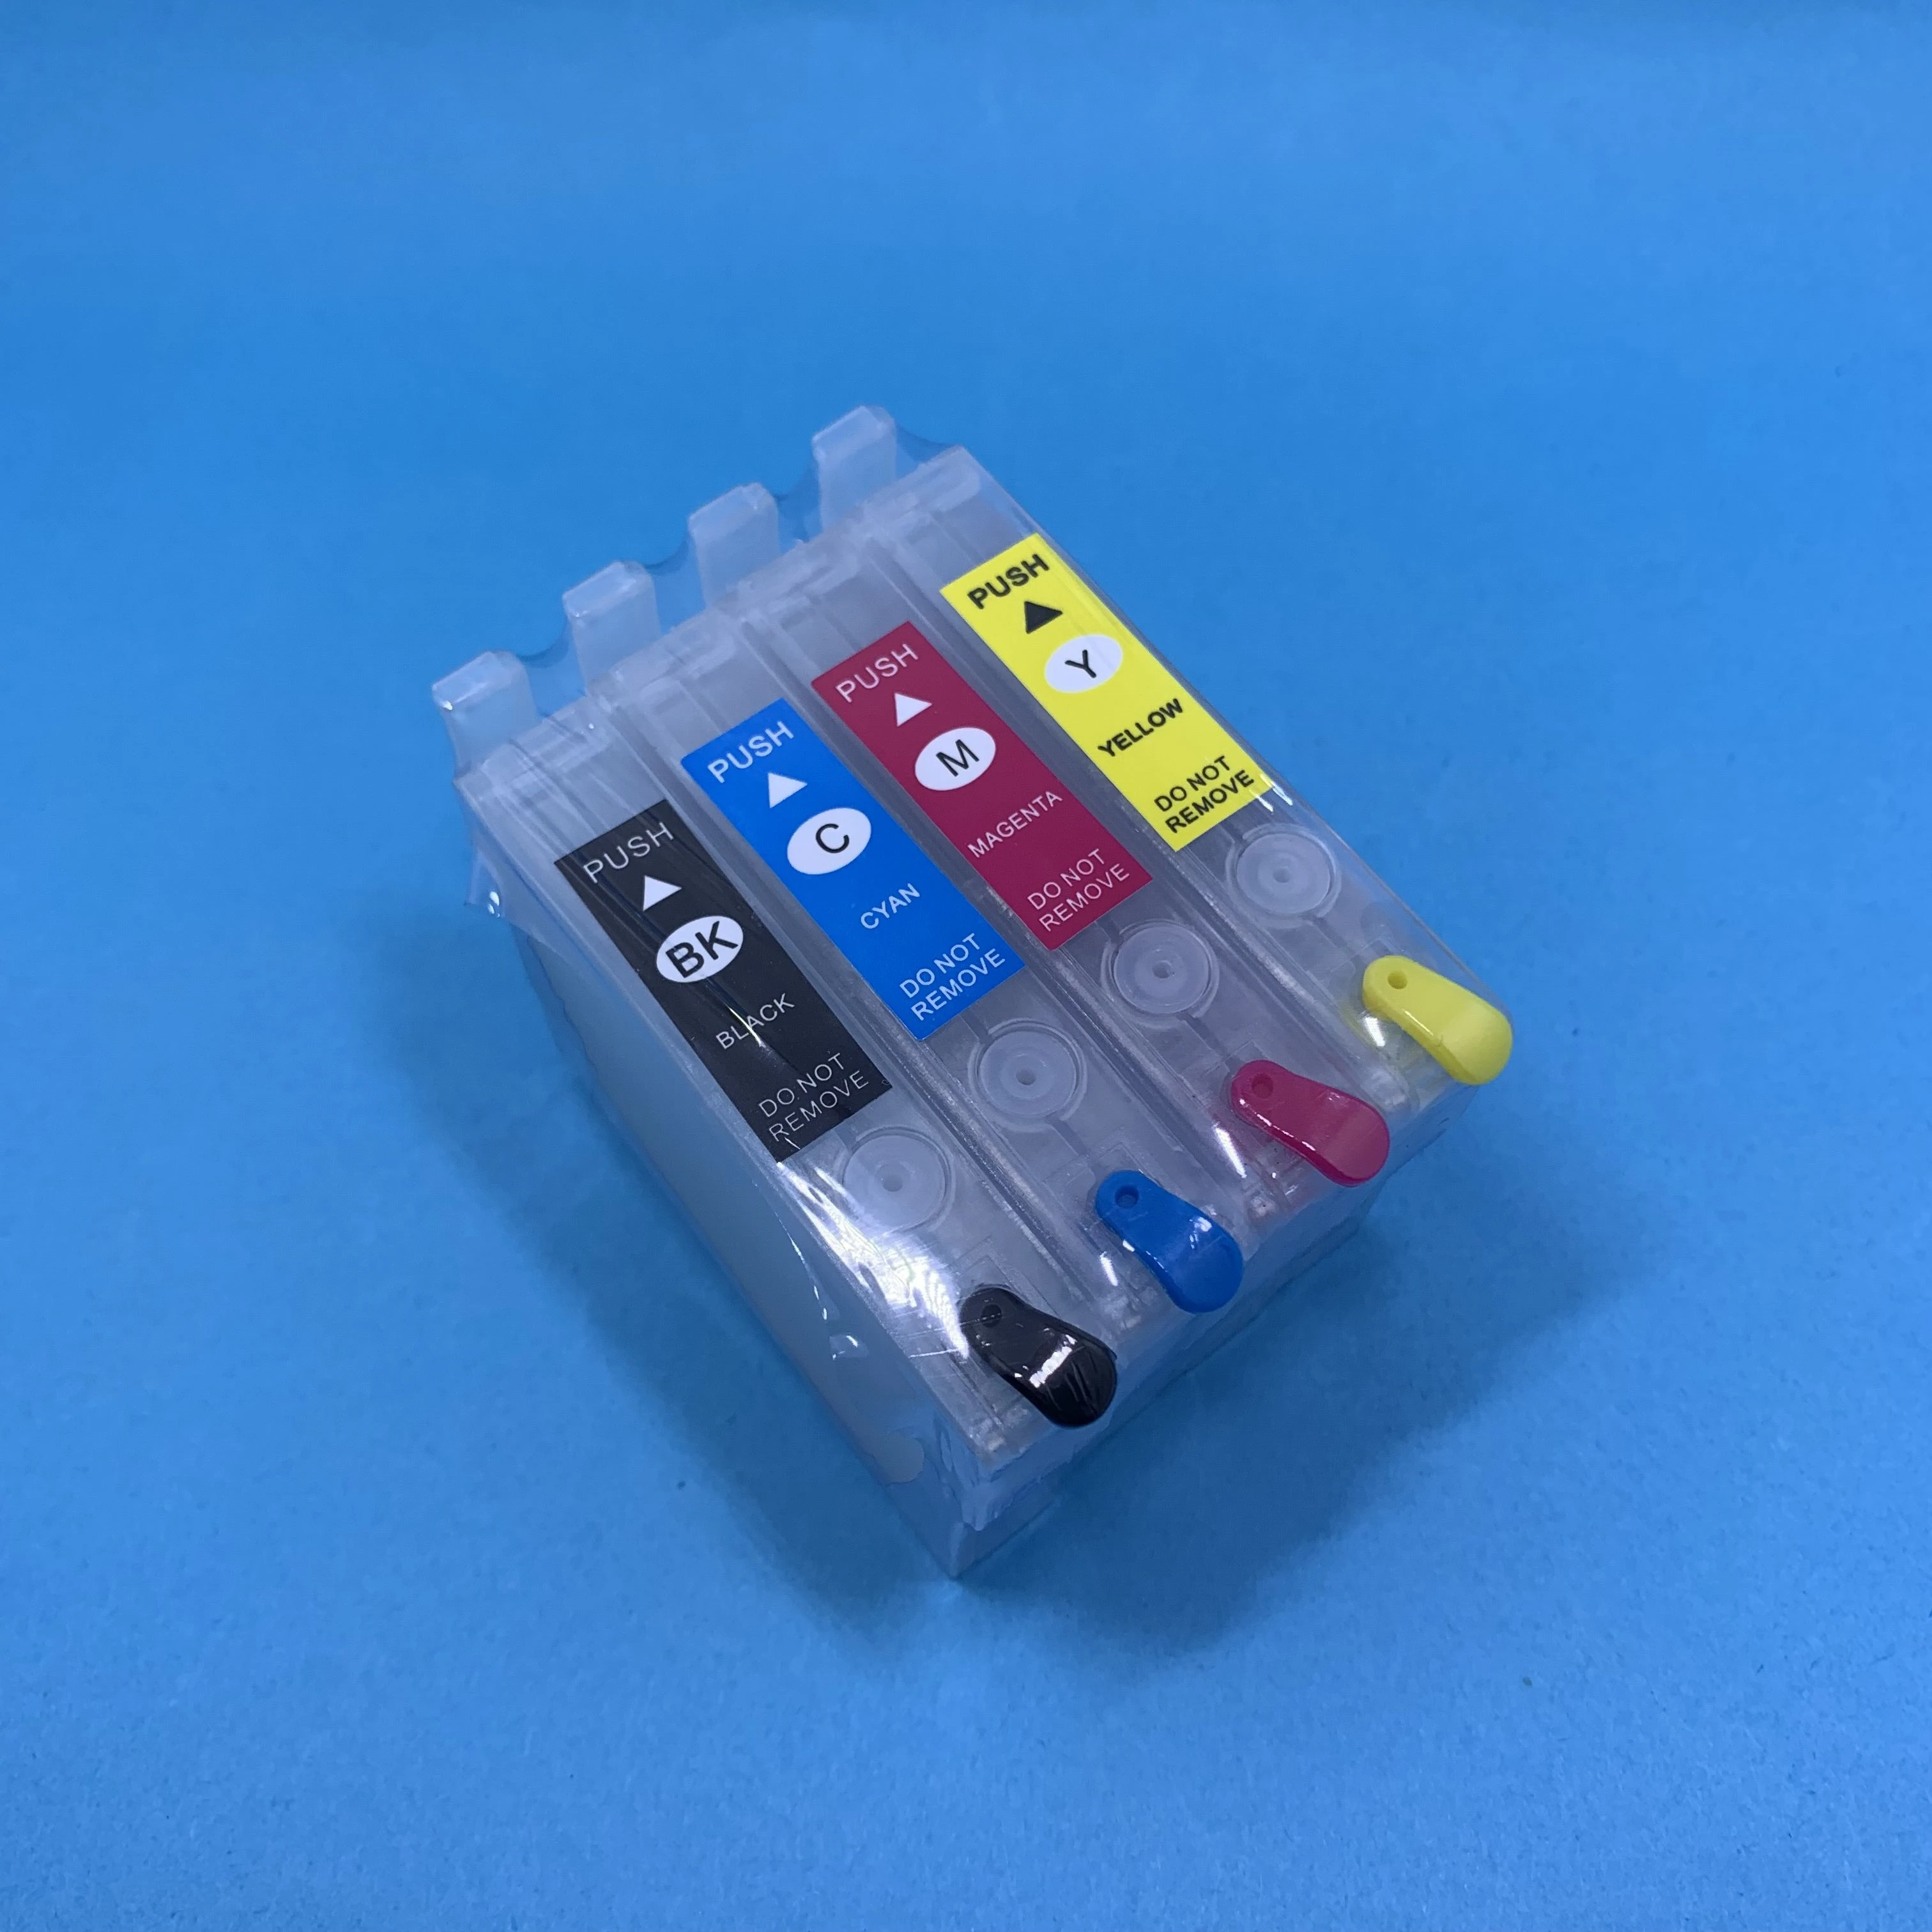 

29XL T2991 Refillable Ink Cartridge for Epson Expression Home XP-235 XP-332 XP-335 XP-432 XP-435 XP-245 XP-247 XP-342 XP-345